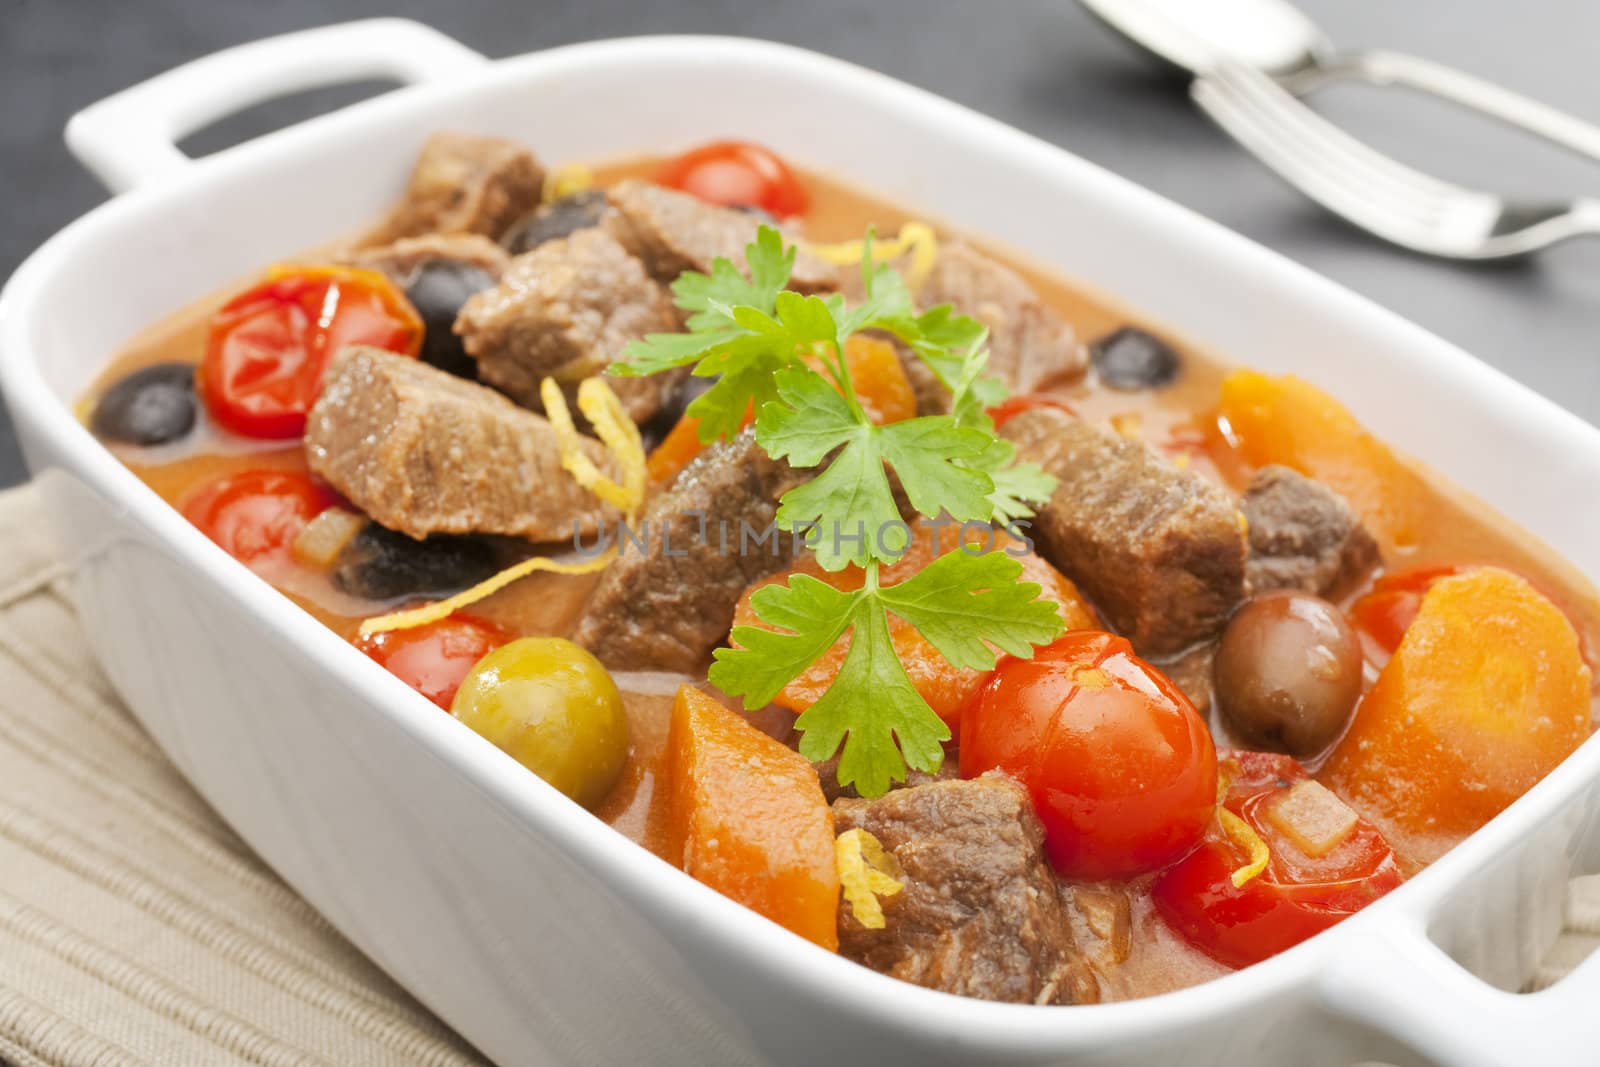 Beef Stew with Olives by Travelling-light